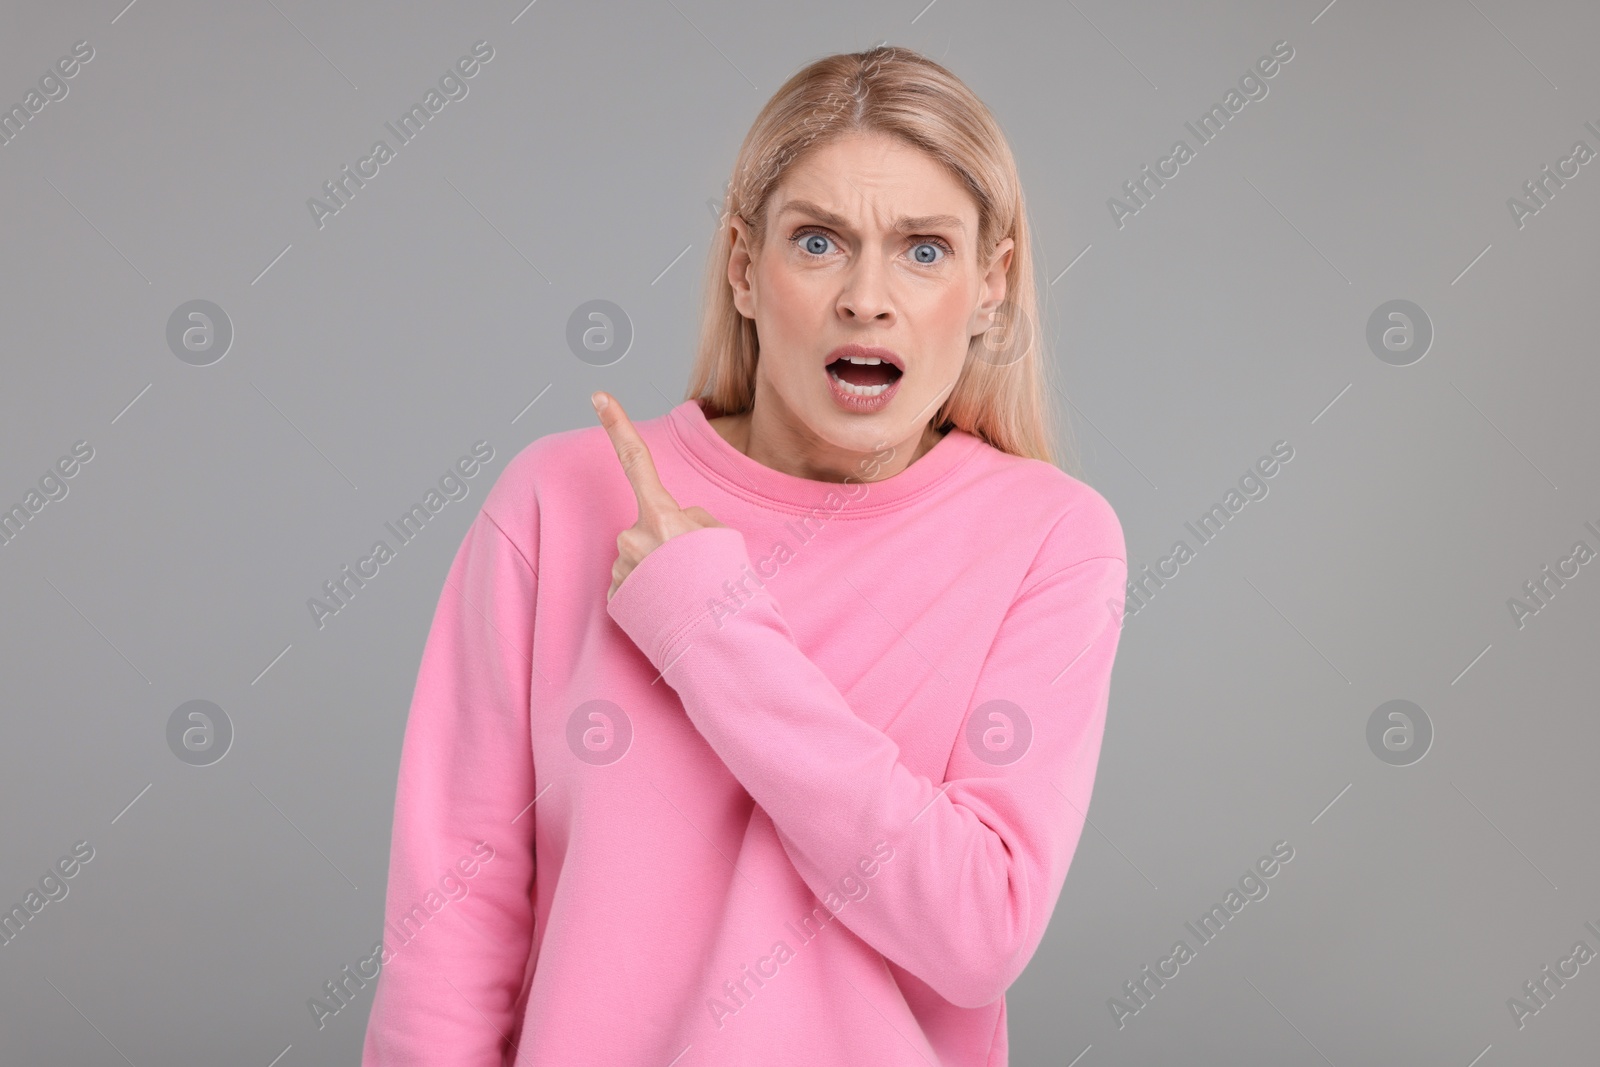 Photo of Surprised woman pointing at something on grey background